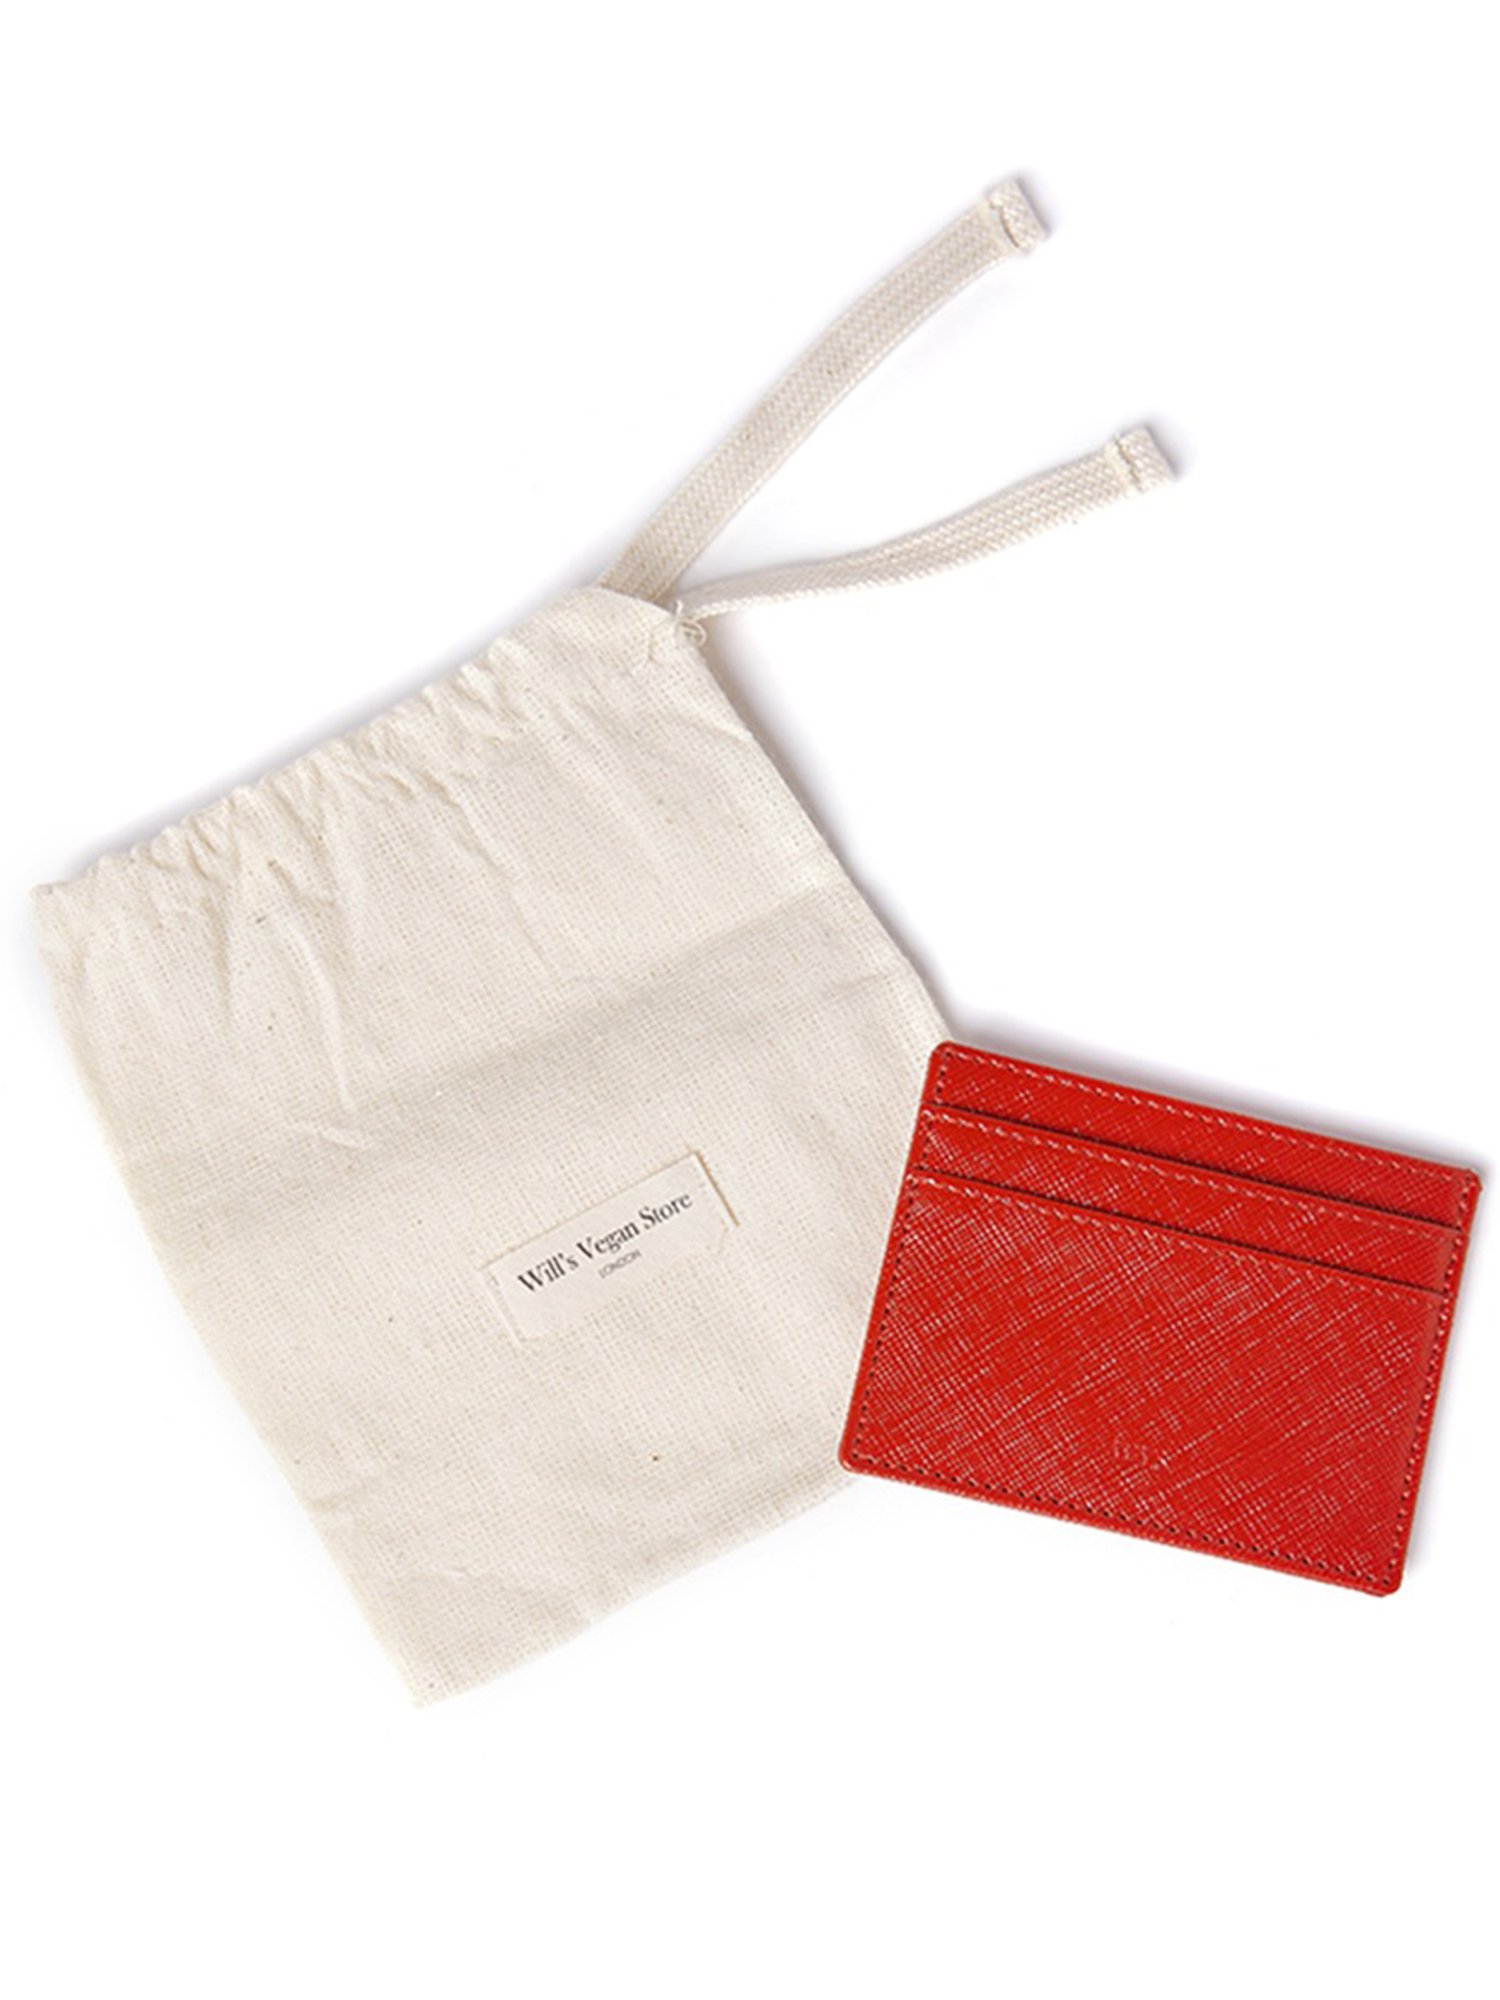 Cardholder Saffiano Red from Shop Like You Give a Damn